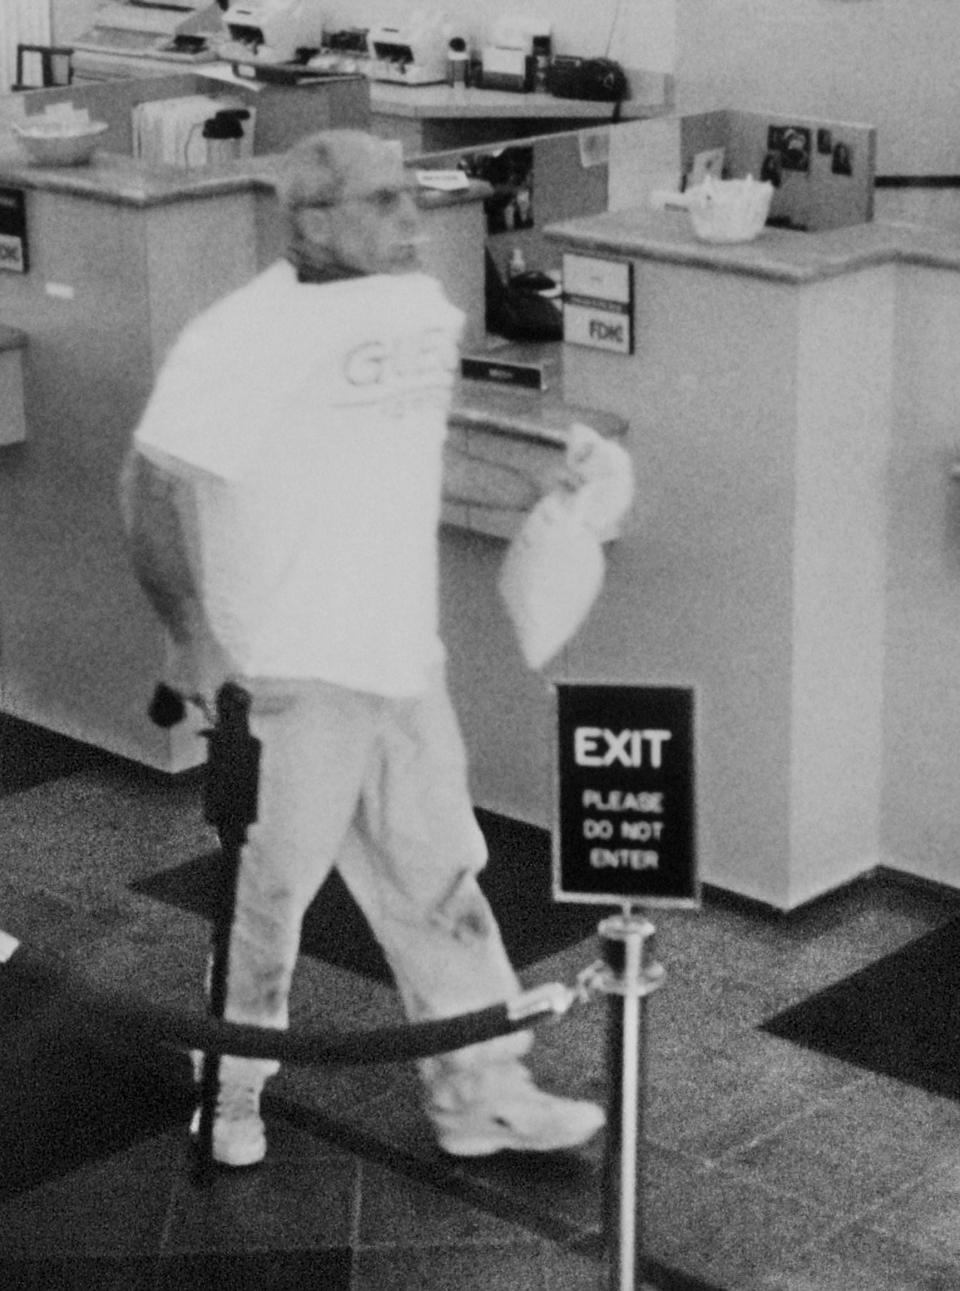 Brian Wells is seen leaving the PNC bank in Summit Towne Centre south of Erie on Aug. 28, 2003. He is carrying a cane gun and wearing a collar bomb, which is protruding from under his shirt. This image was taken after he received money from the teller. In his mouth is a lollipop that he picked up while waiting to approach the teller. Wells later died when the collar bomb went off.